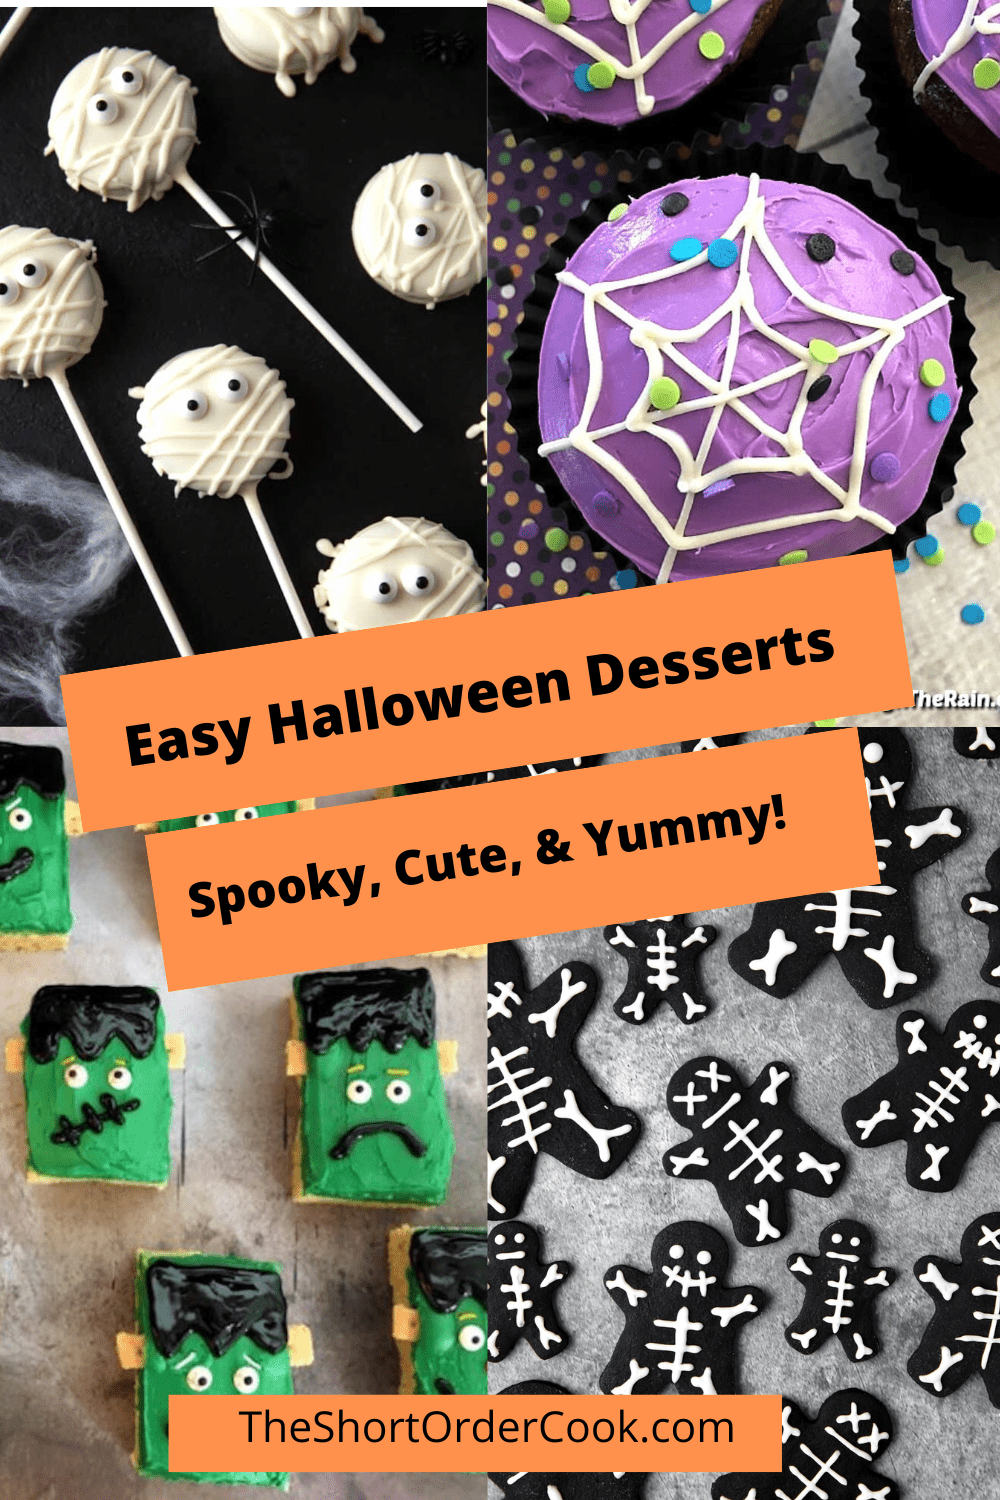 Different desserts decorated for Halloween.